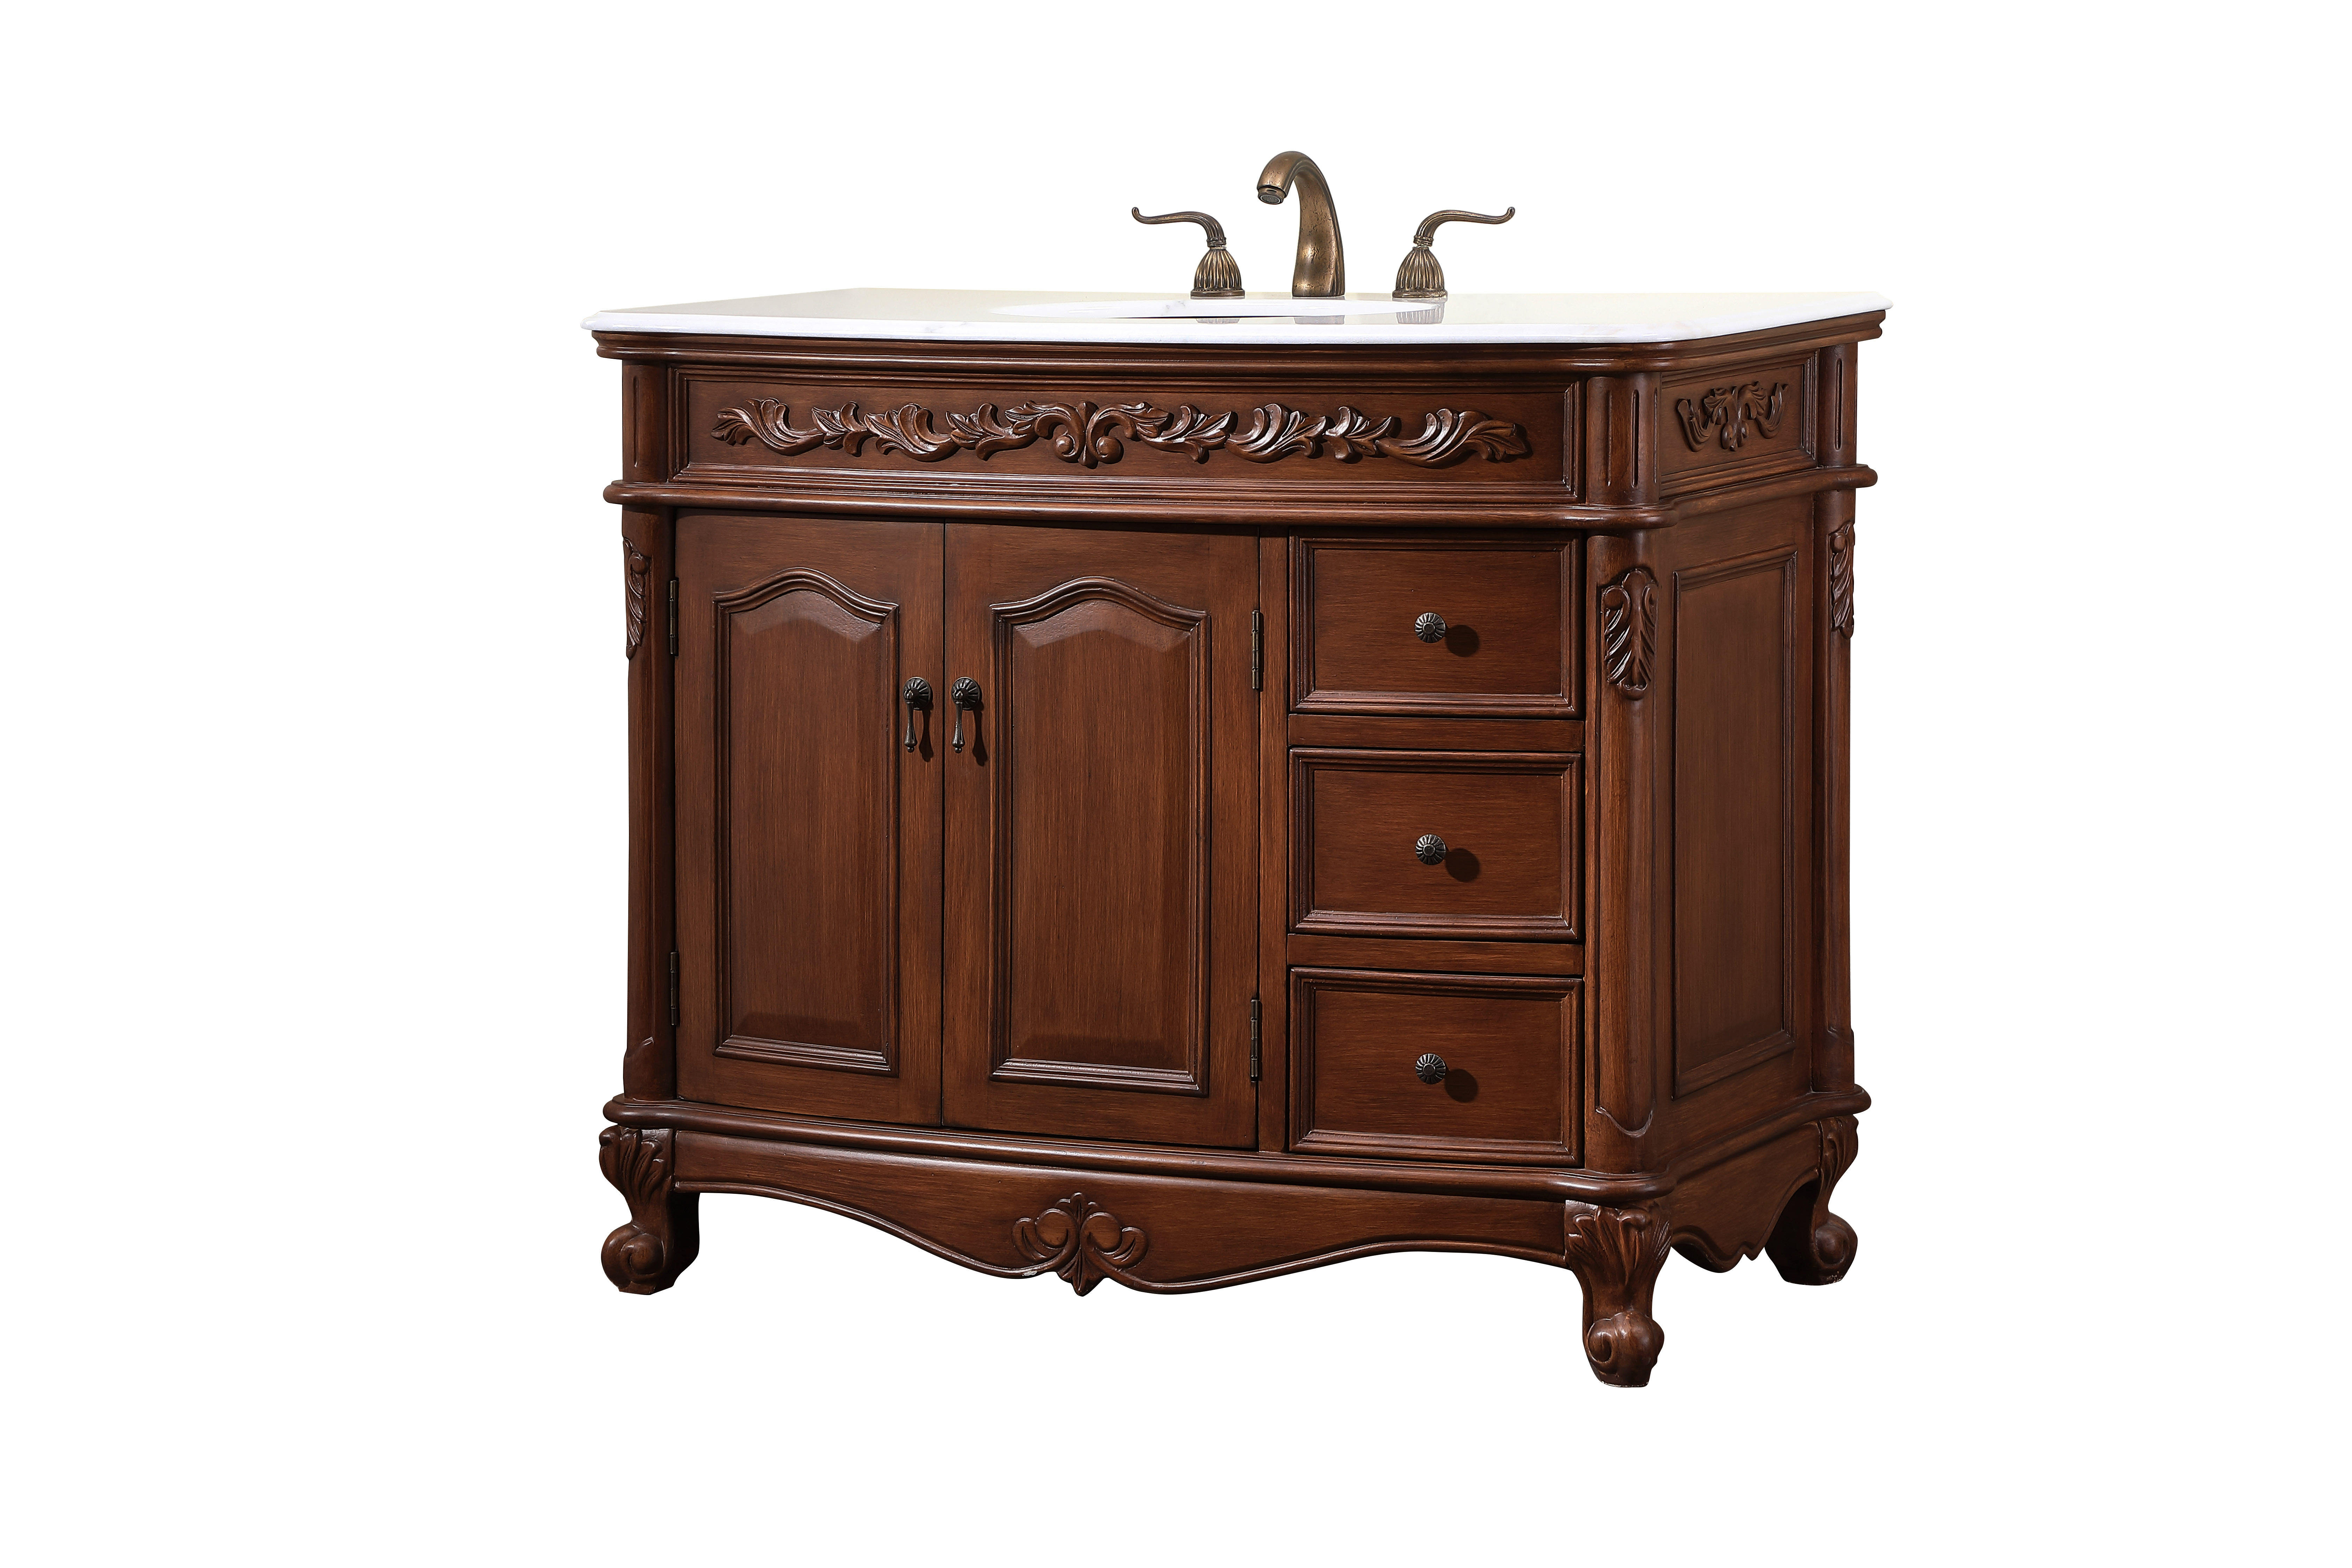 42" Deep Chestnut Finish Vanity Victorian Style Leg with White Imperial Marble Top